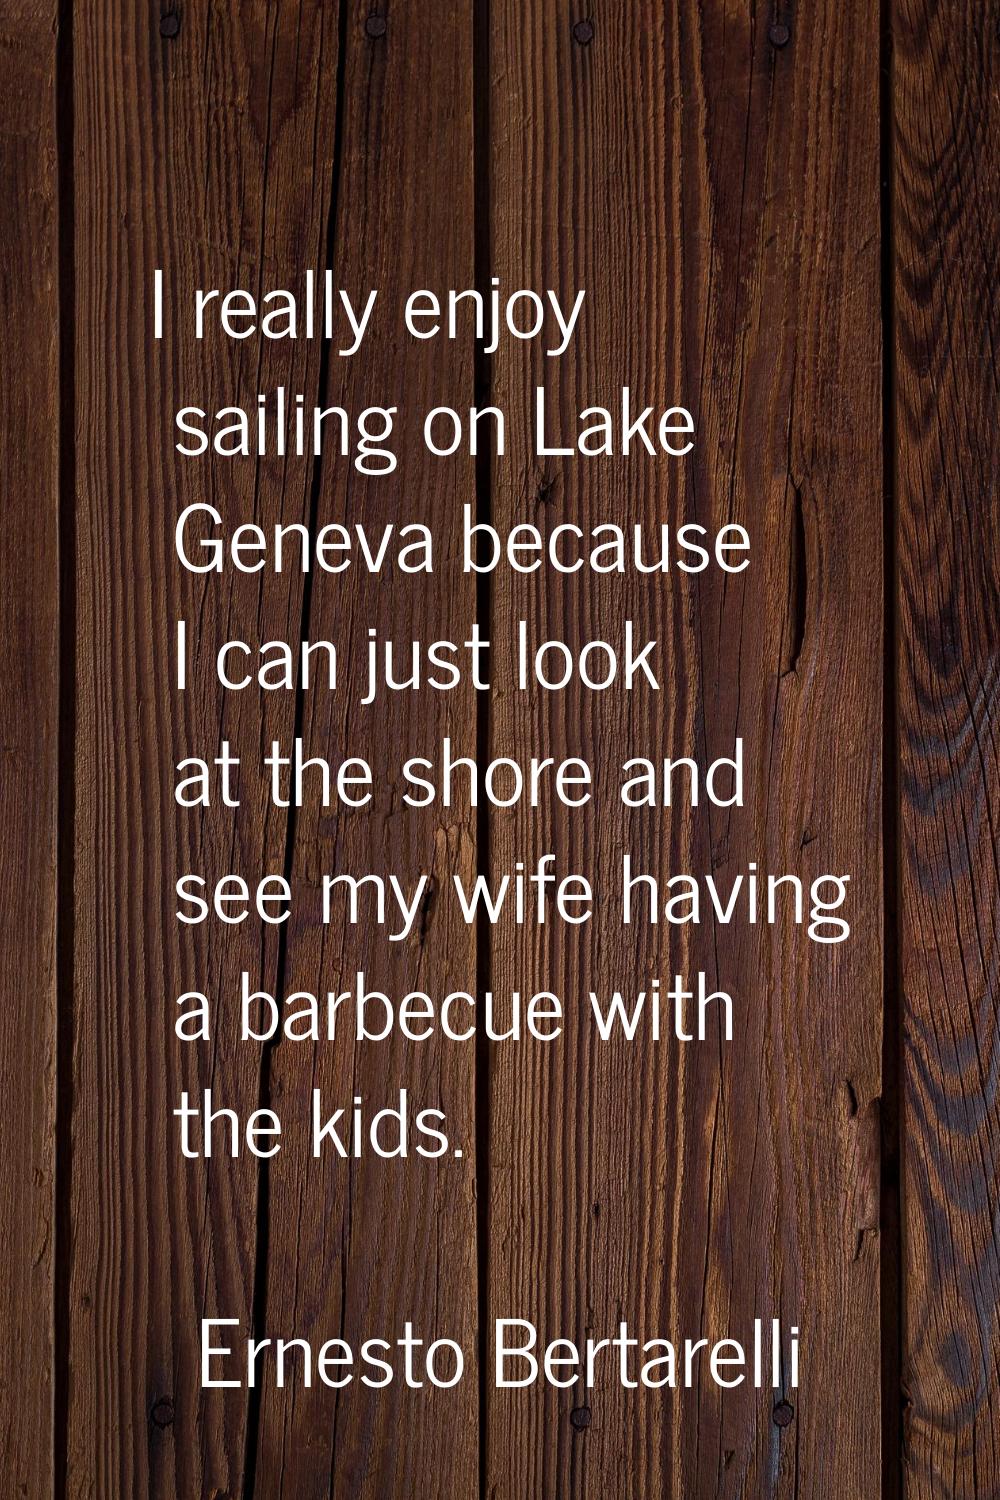 I really enjoy sailing on Lake Geneva because I can just look at the shore and see my wife having a